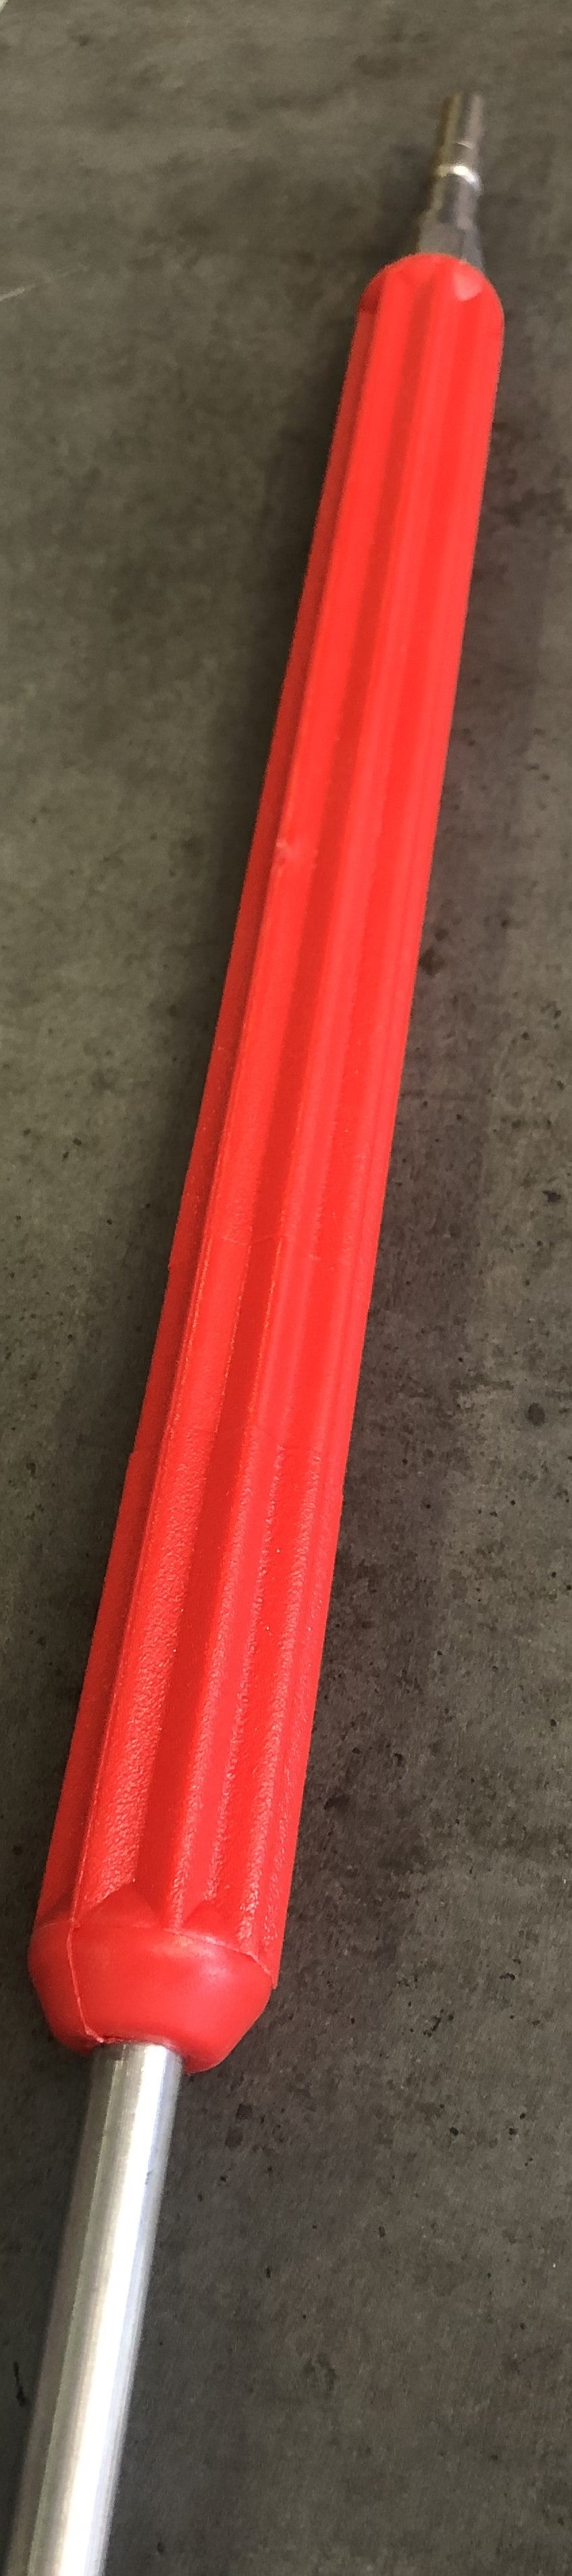 JW RED STRAIGHT- STAINLESS STEEL SINGLE LANCE